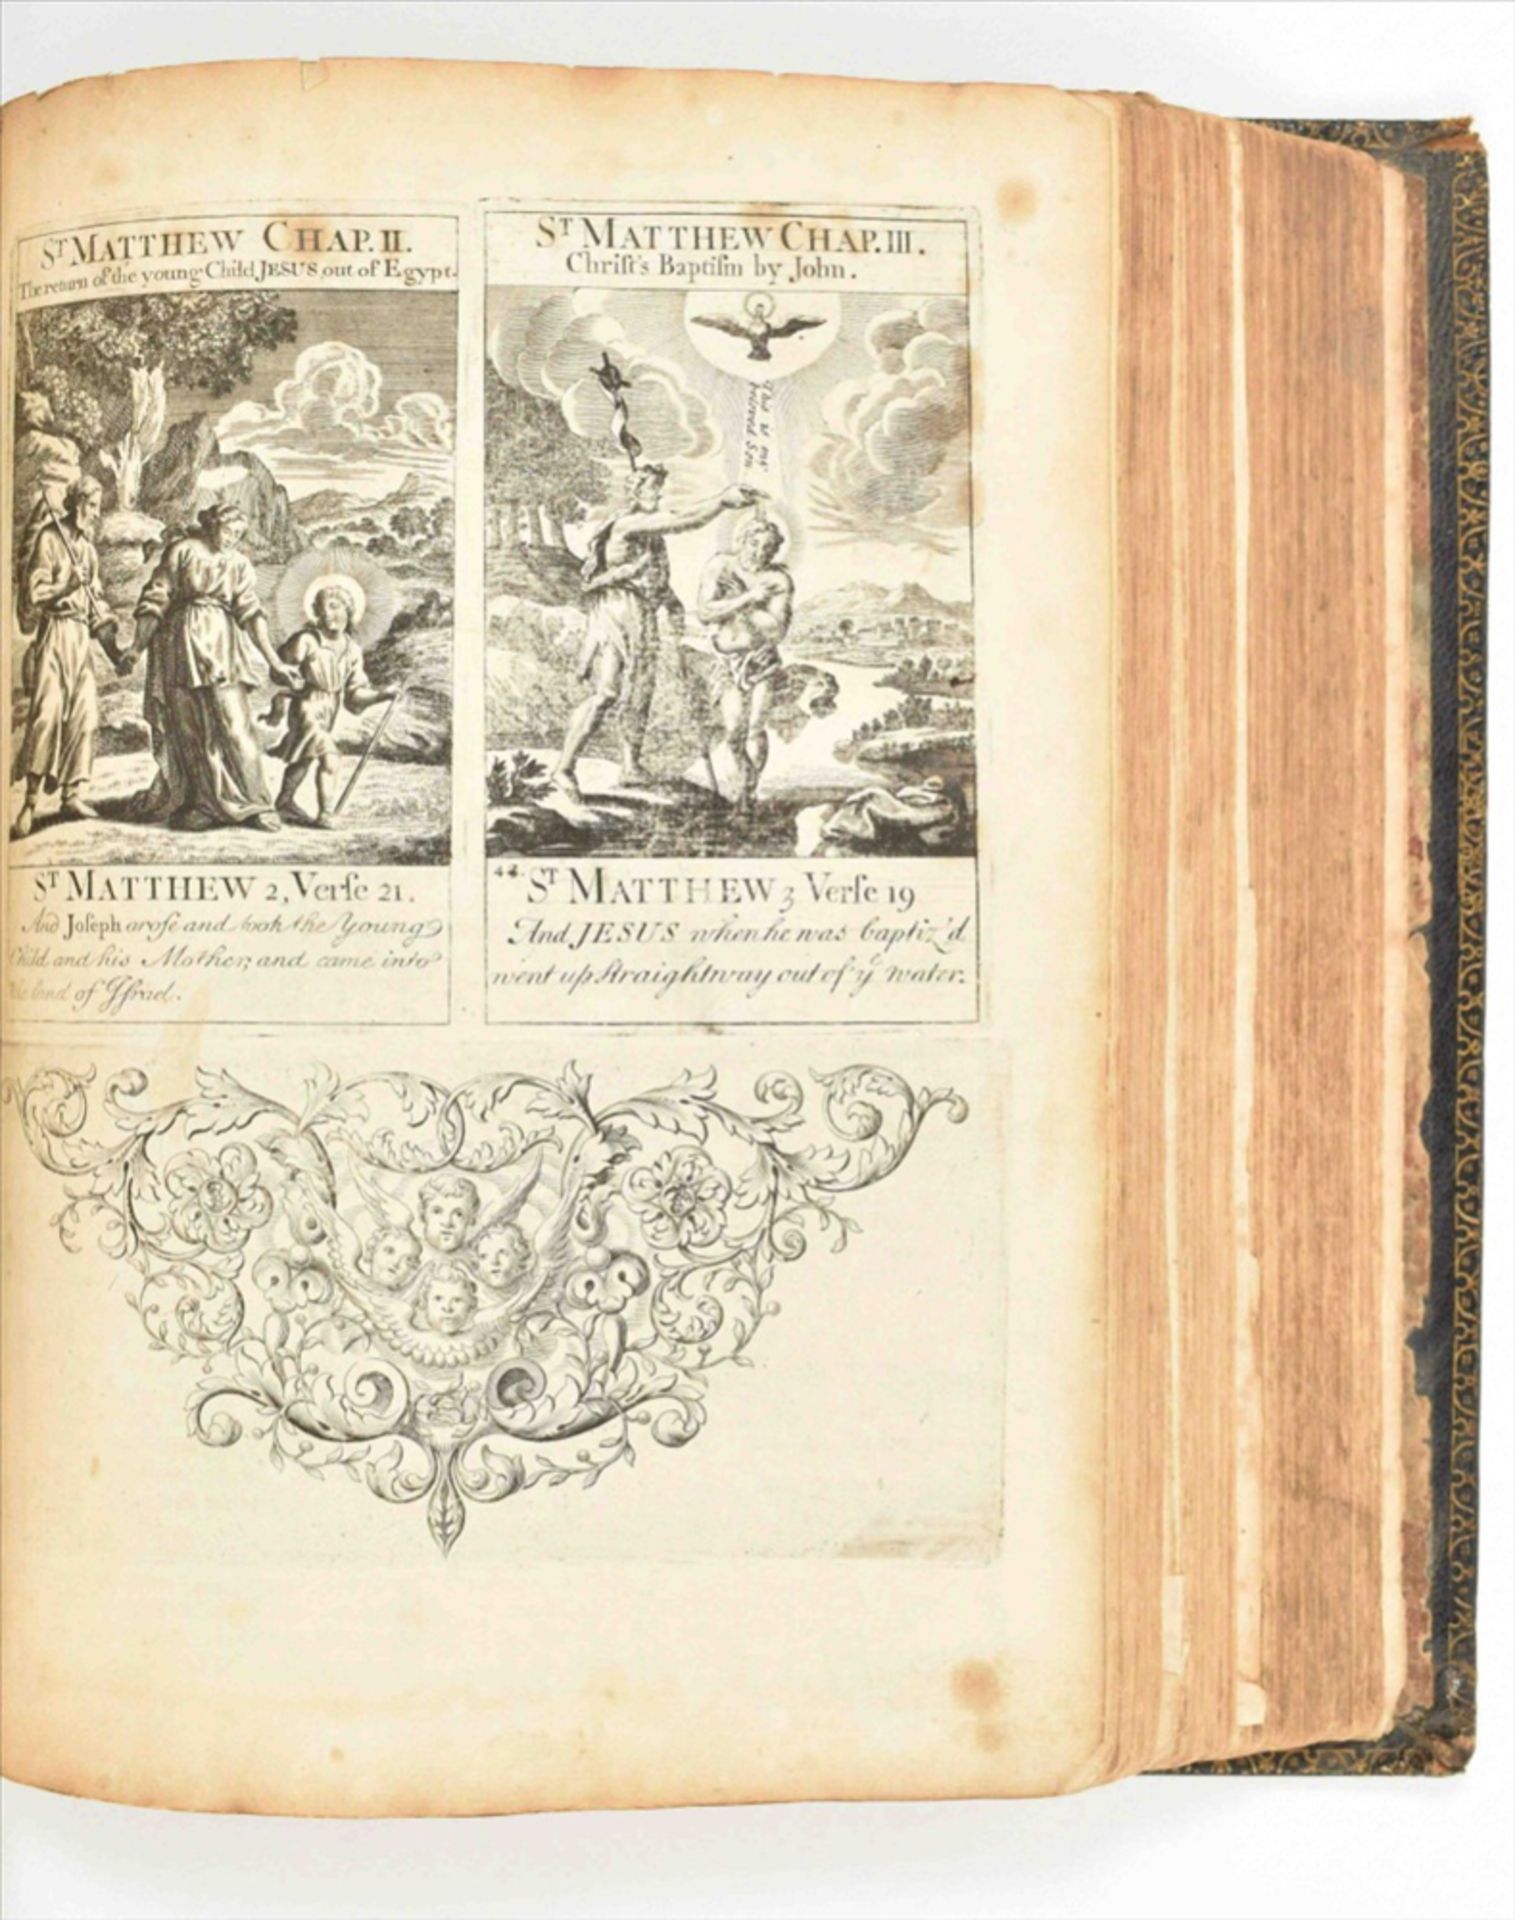 [Bible] The Book of Common Prayer and the English Bible with maps and engravings - Image 8 of 10